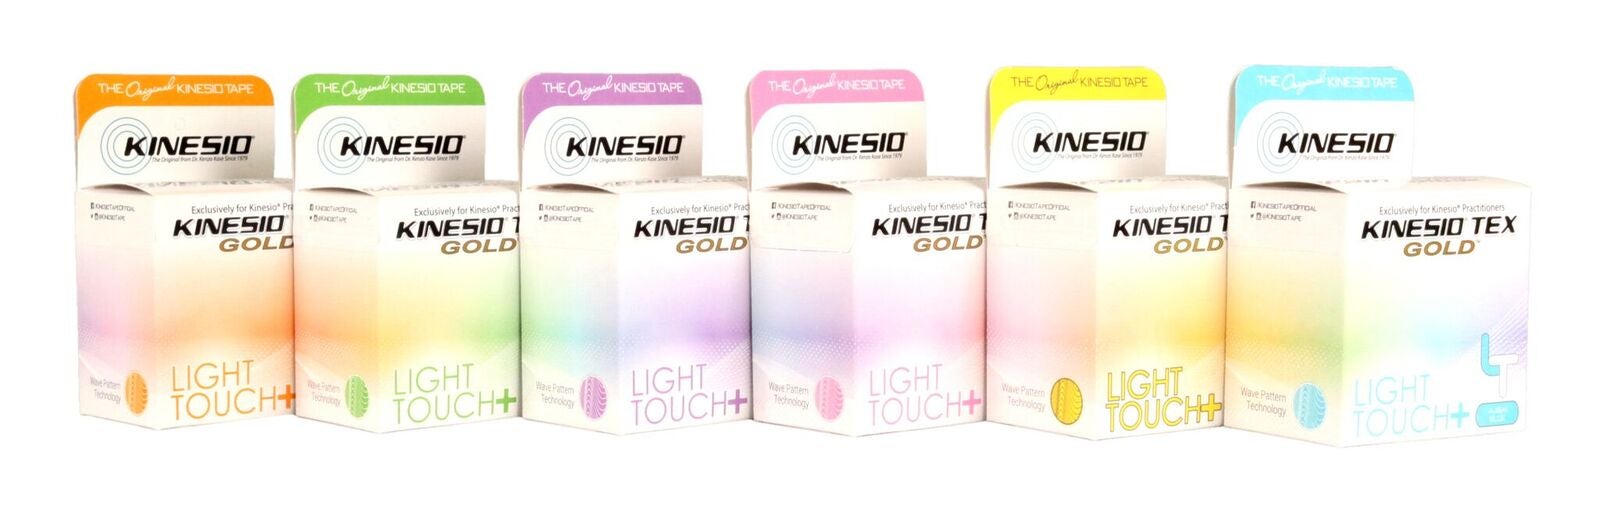 Kinesio Tex Gold Light Touch +